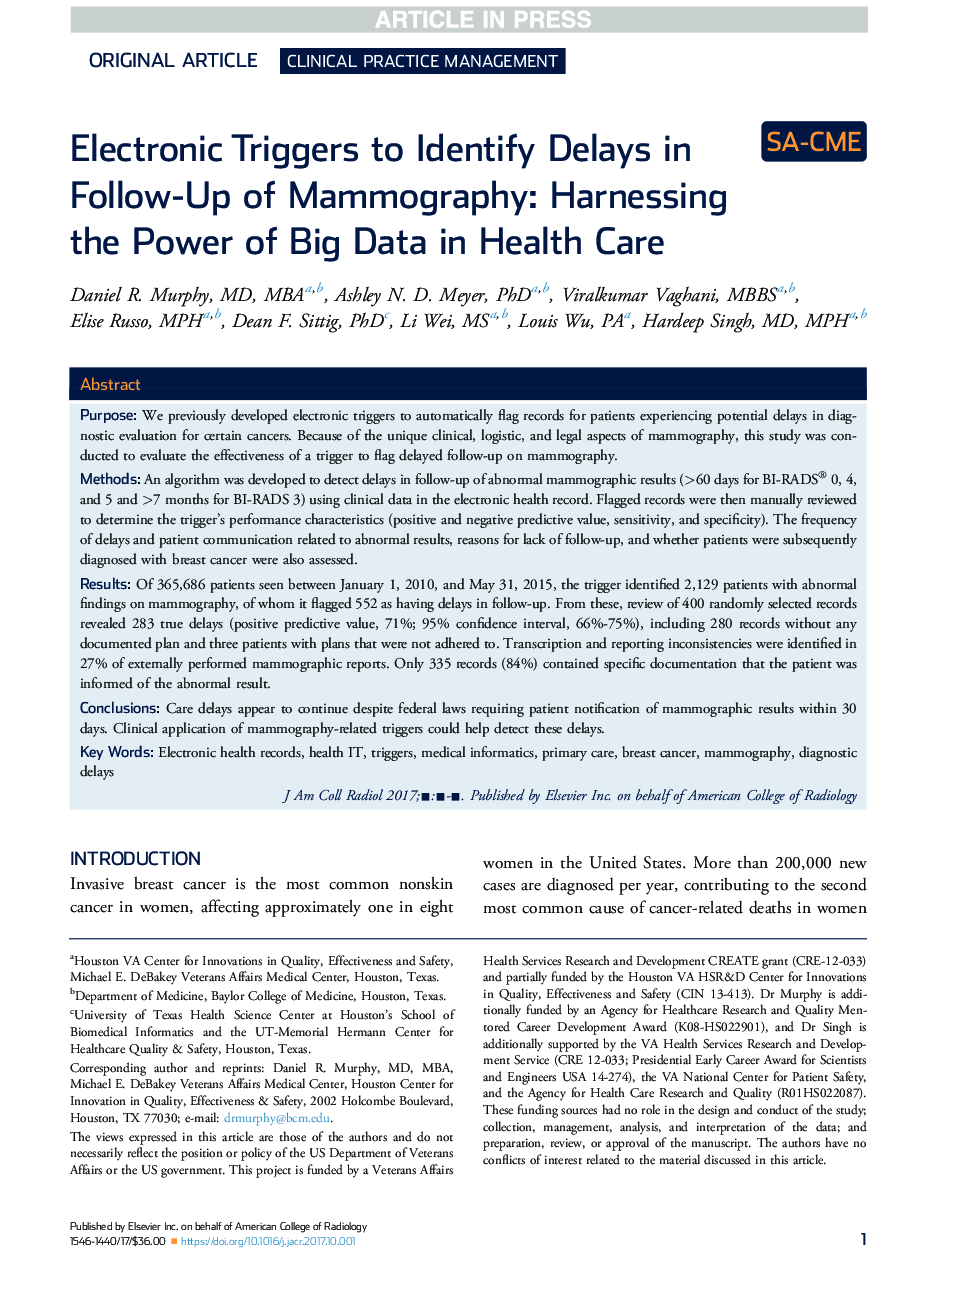 Electronic Triggers to Identify Delays in Follow-Up of Mammography: Harnessing the Power of Big Data in HealthÂ Care